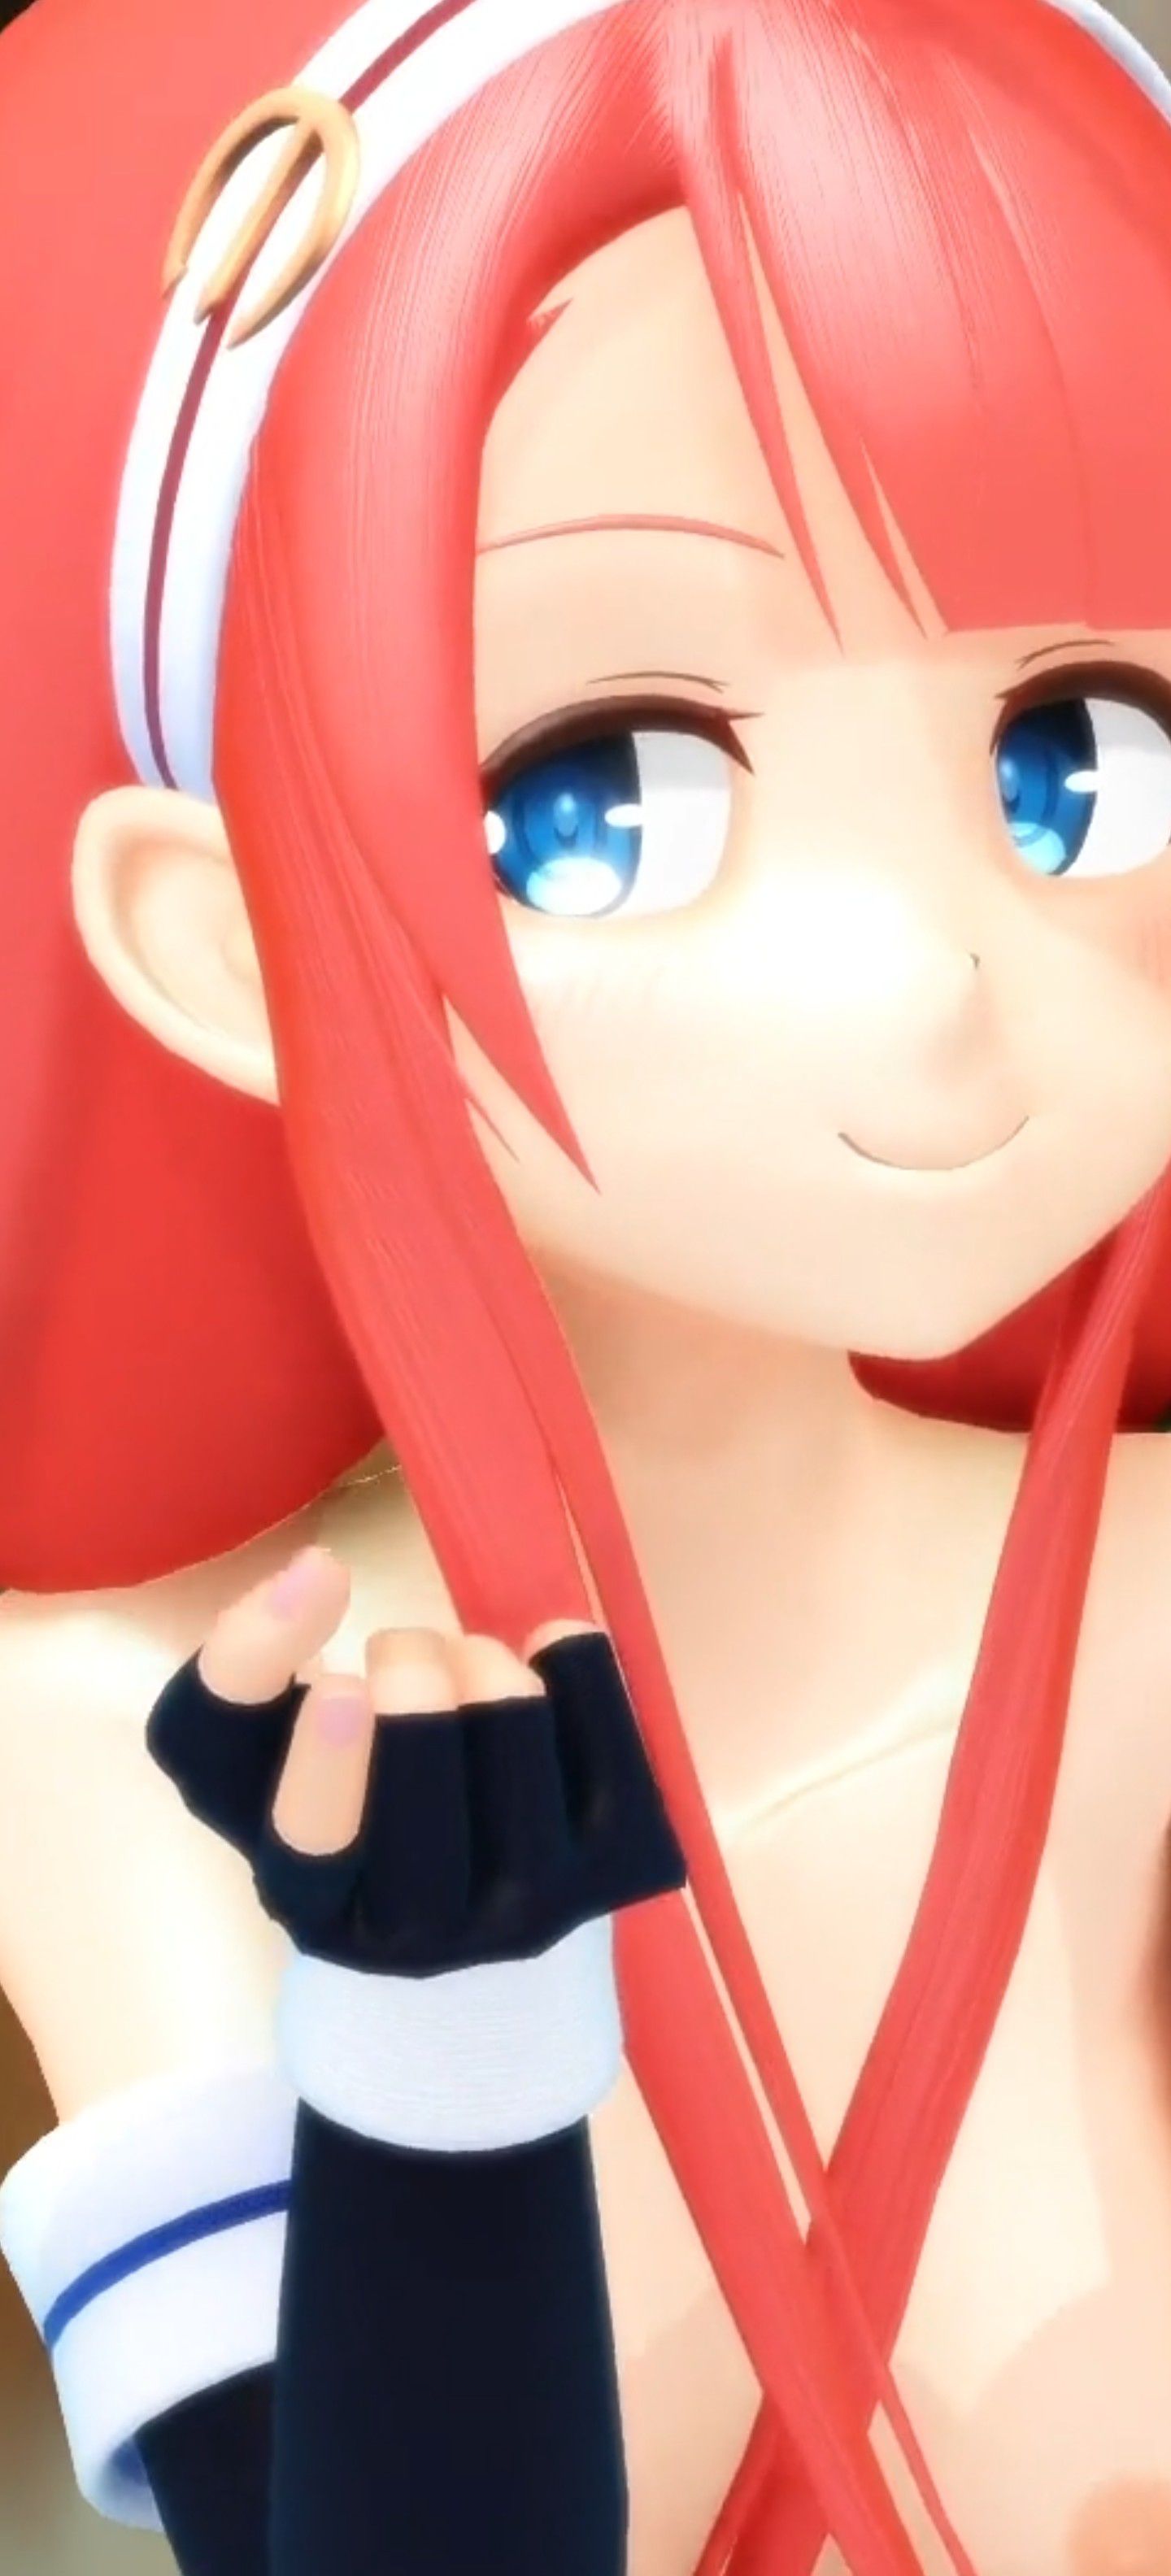 【Good news】Erotic MMD, wwww that pulls out with Gachi 5